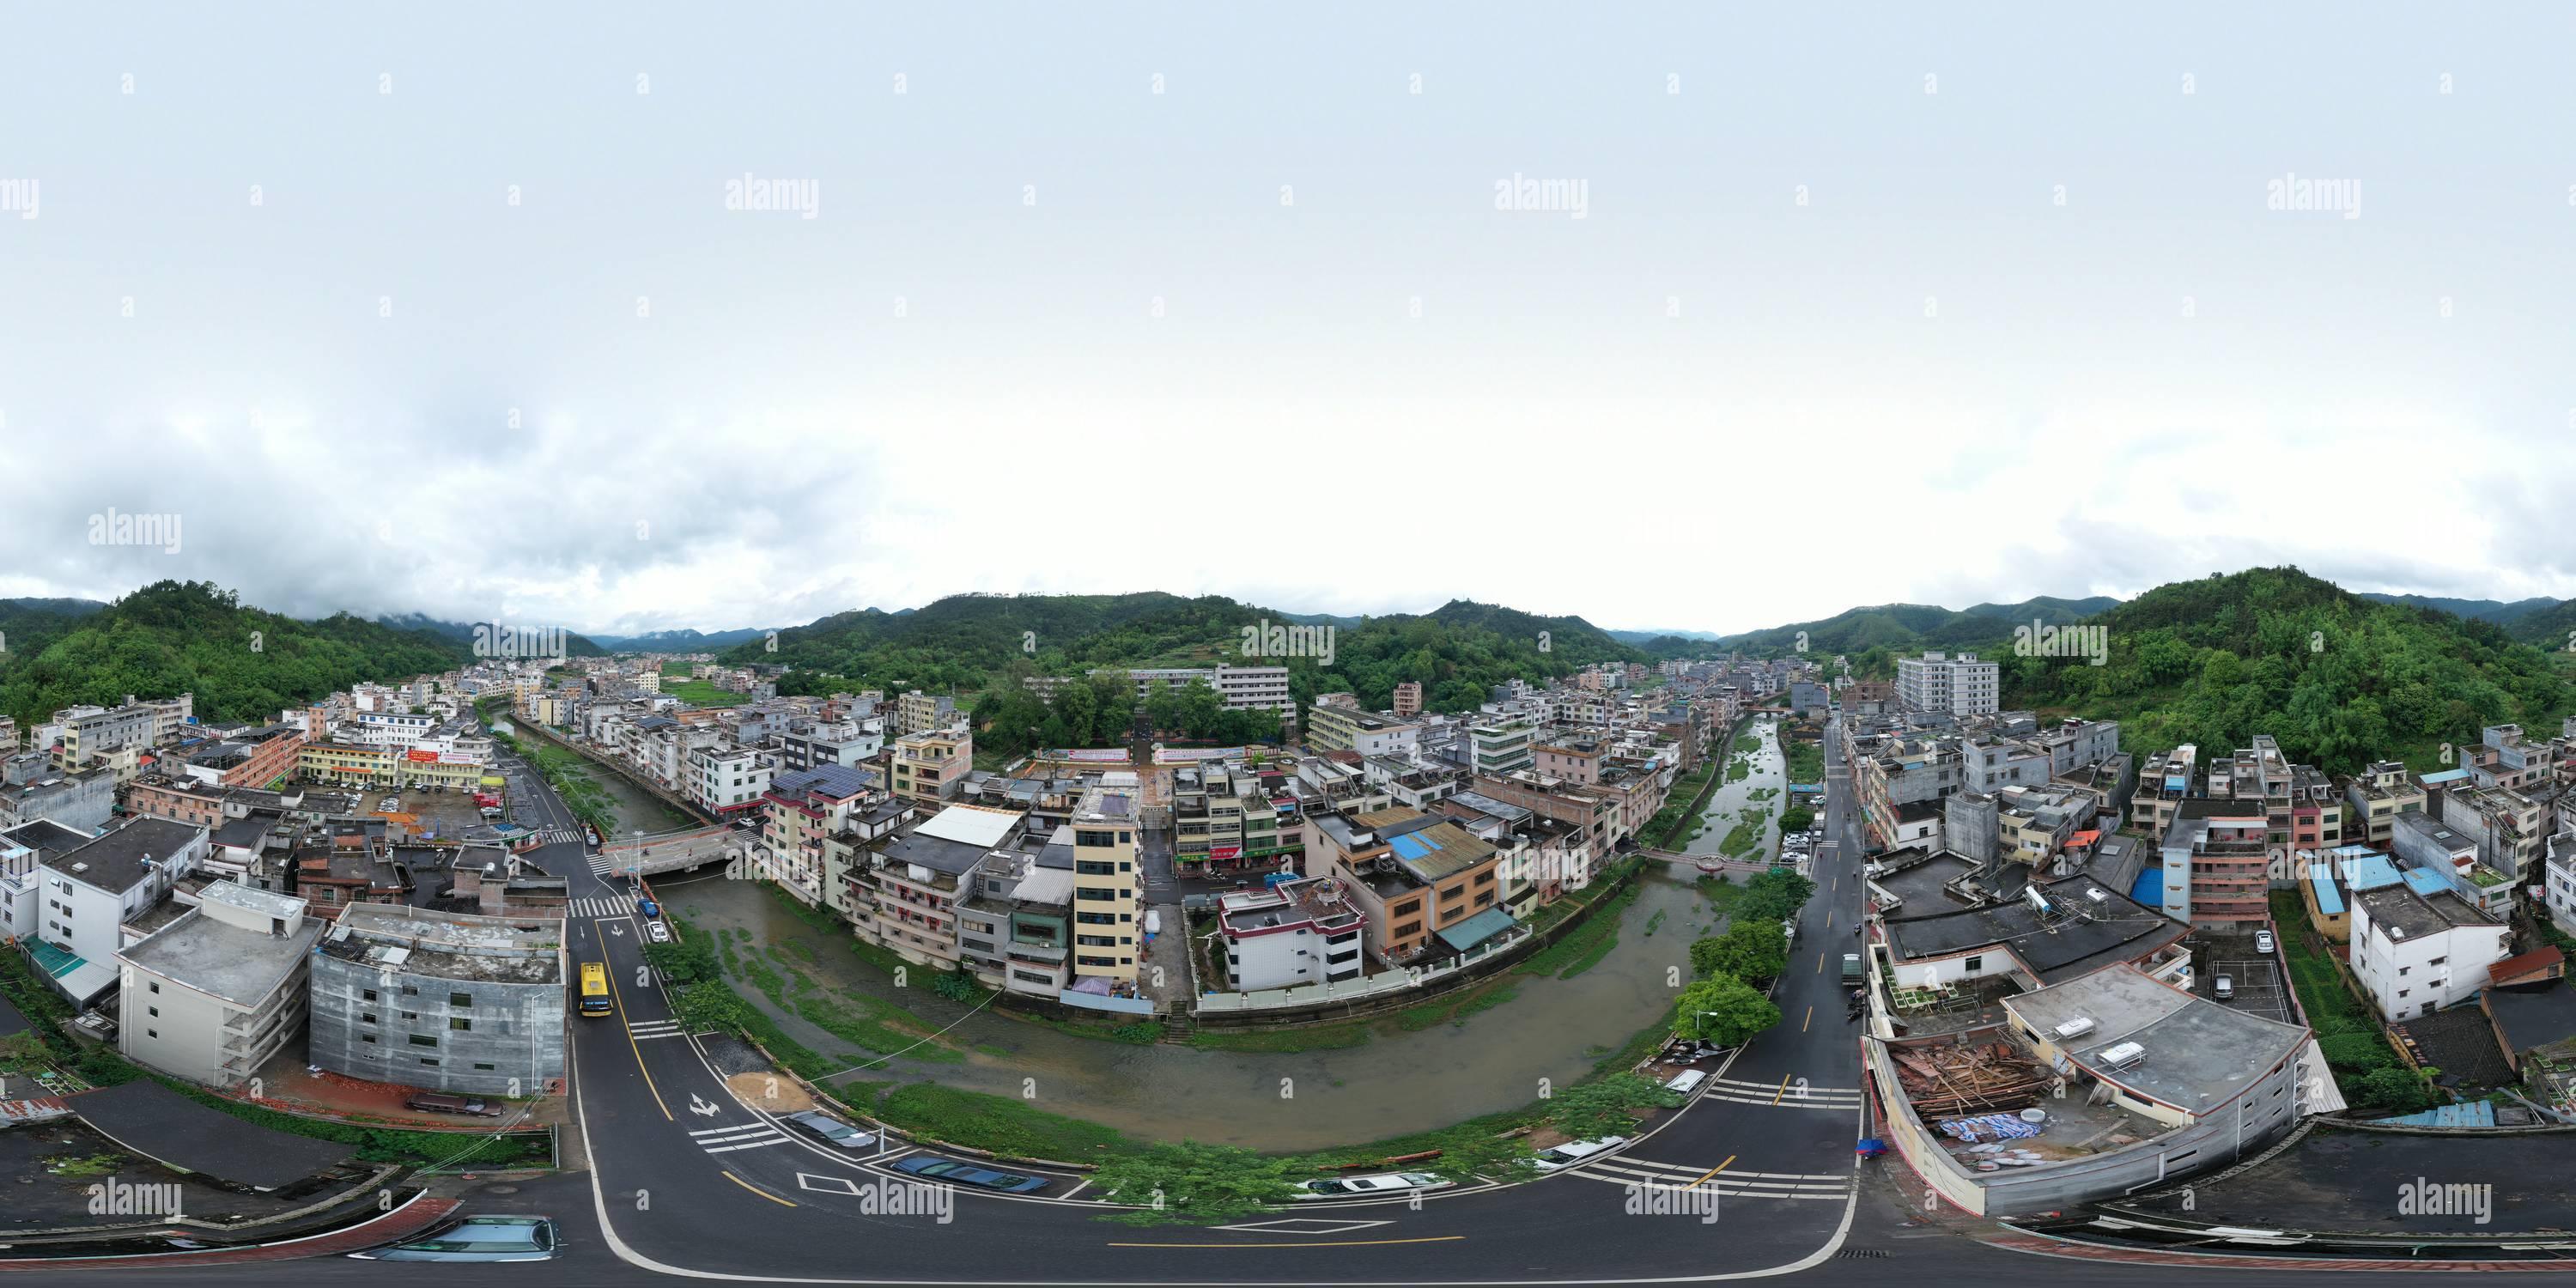 360 degree panoramic view of Aerial panoramic view of Jiayi Town, Luoding City, Guangdong Province, China